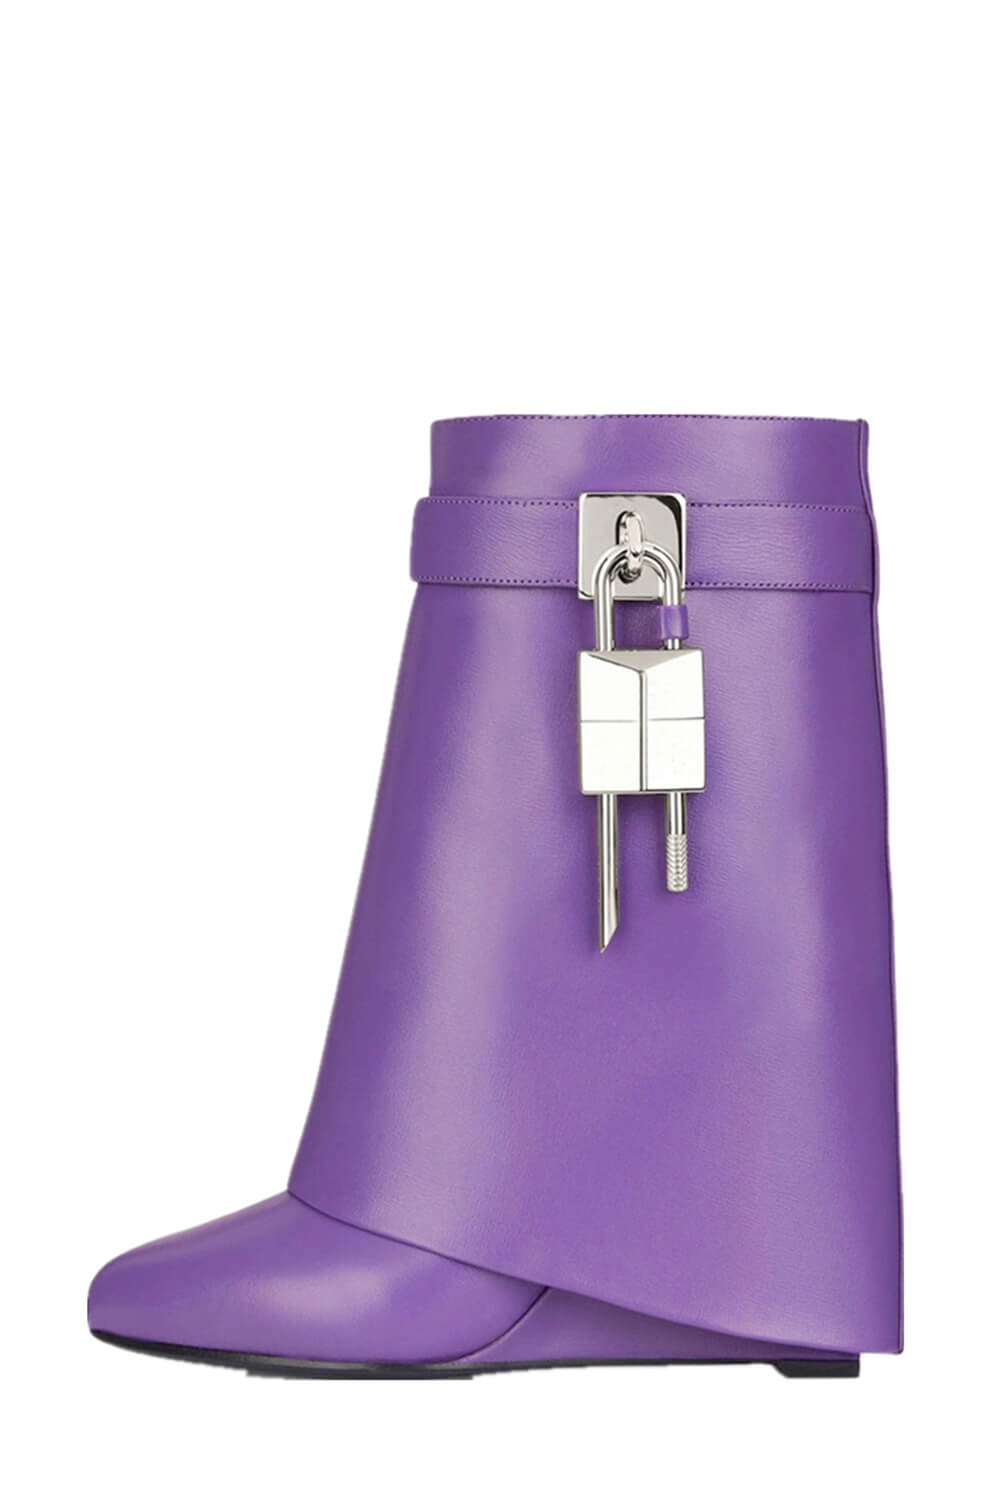 Faux Leather Padlock Detail Folded Wedge Heel Ankle Boots - Violet